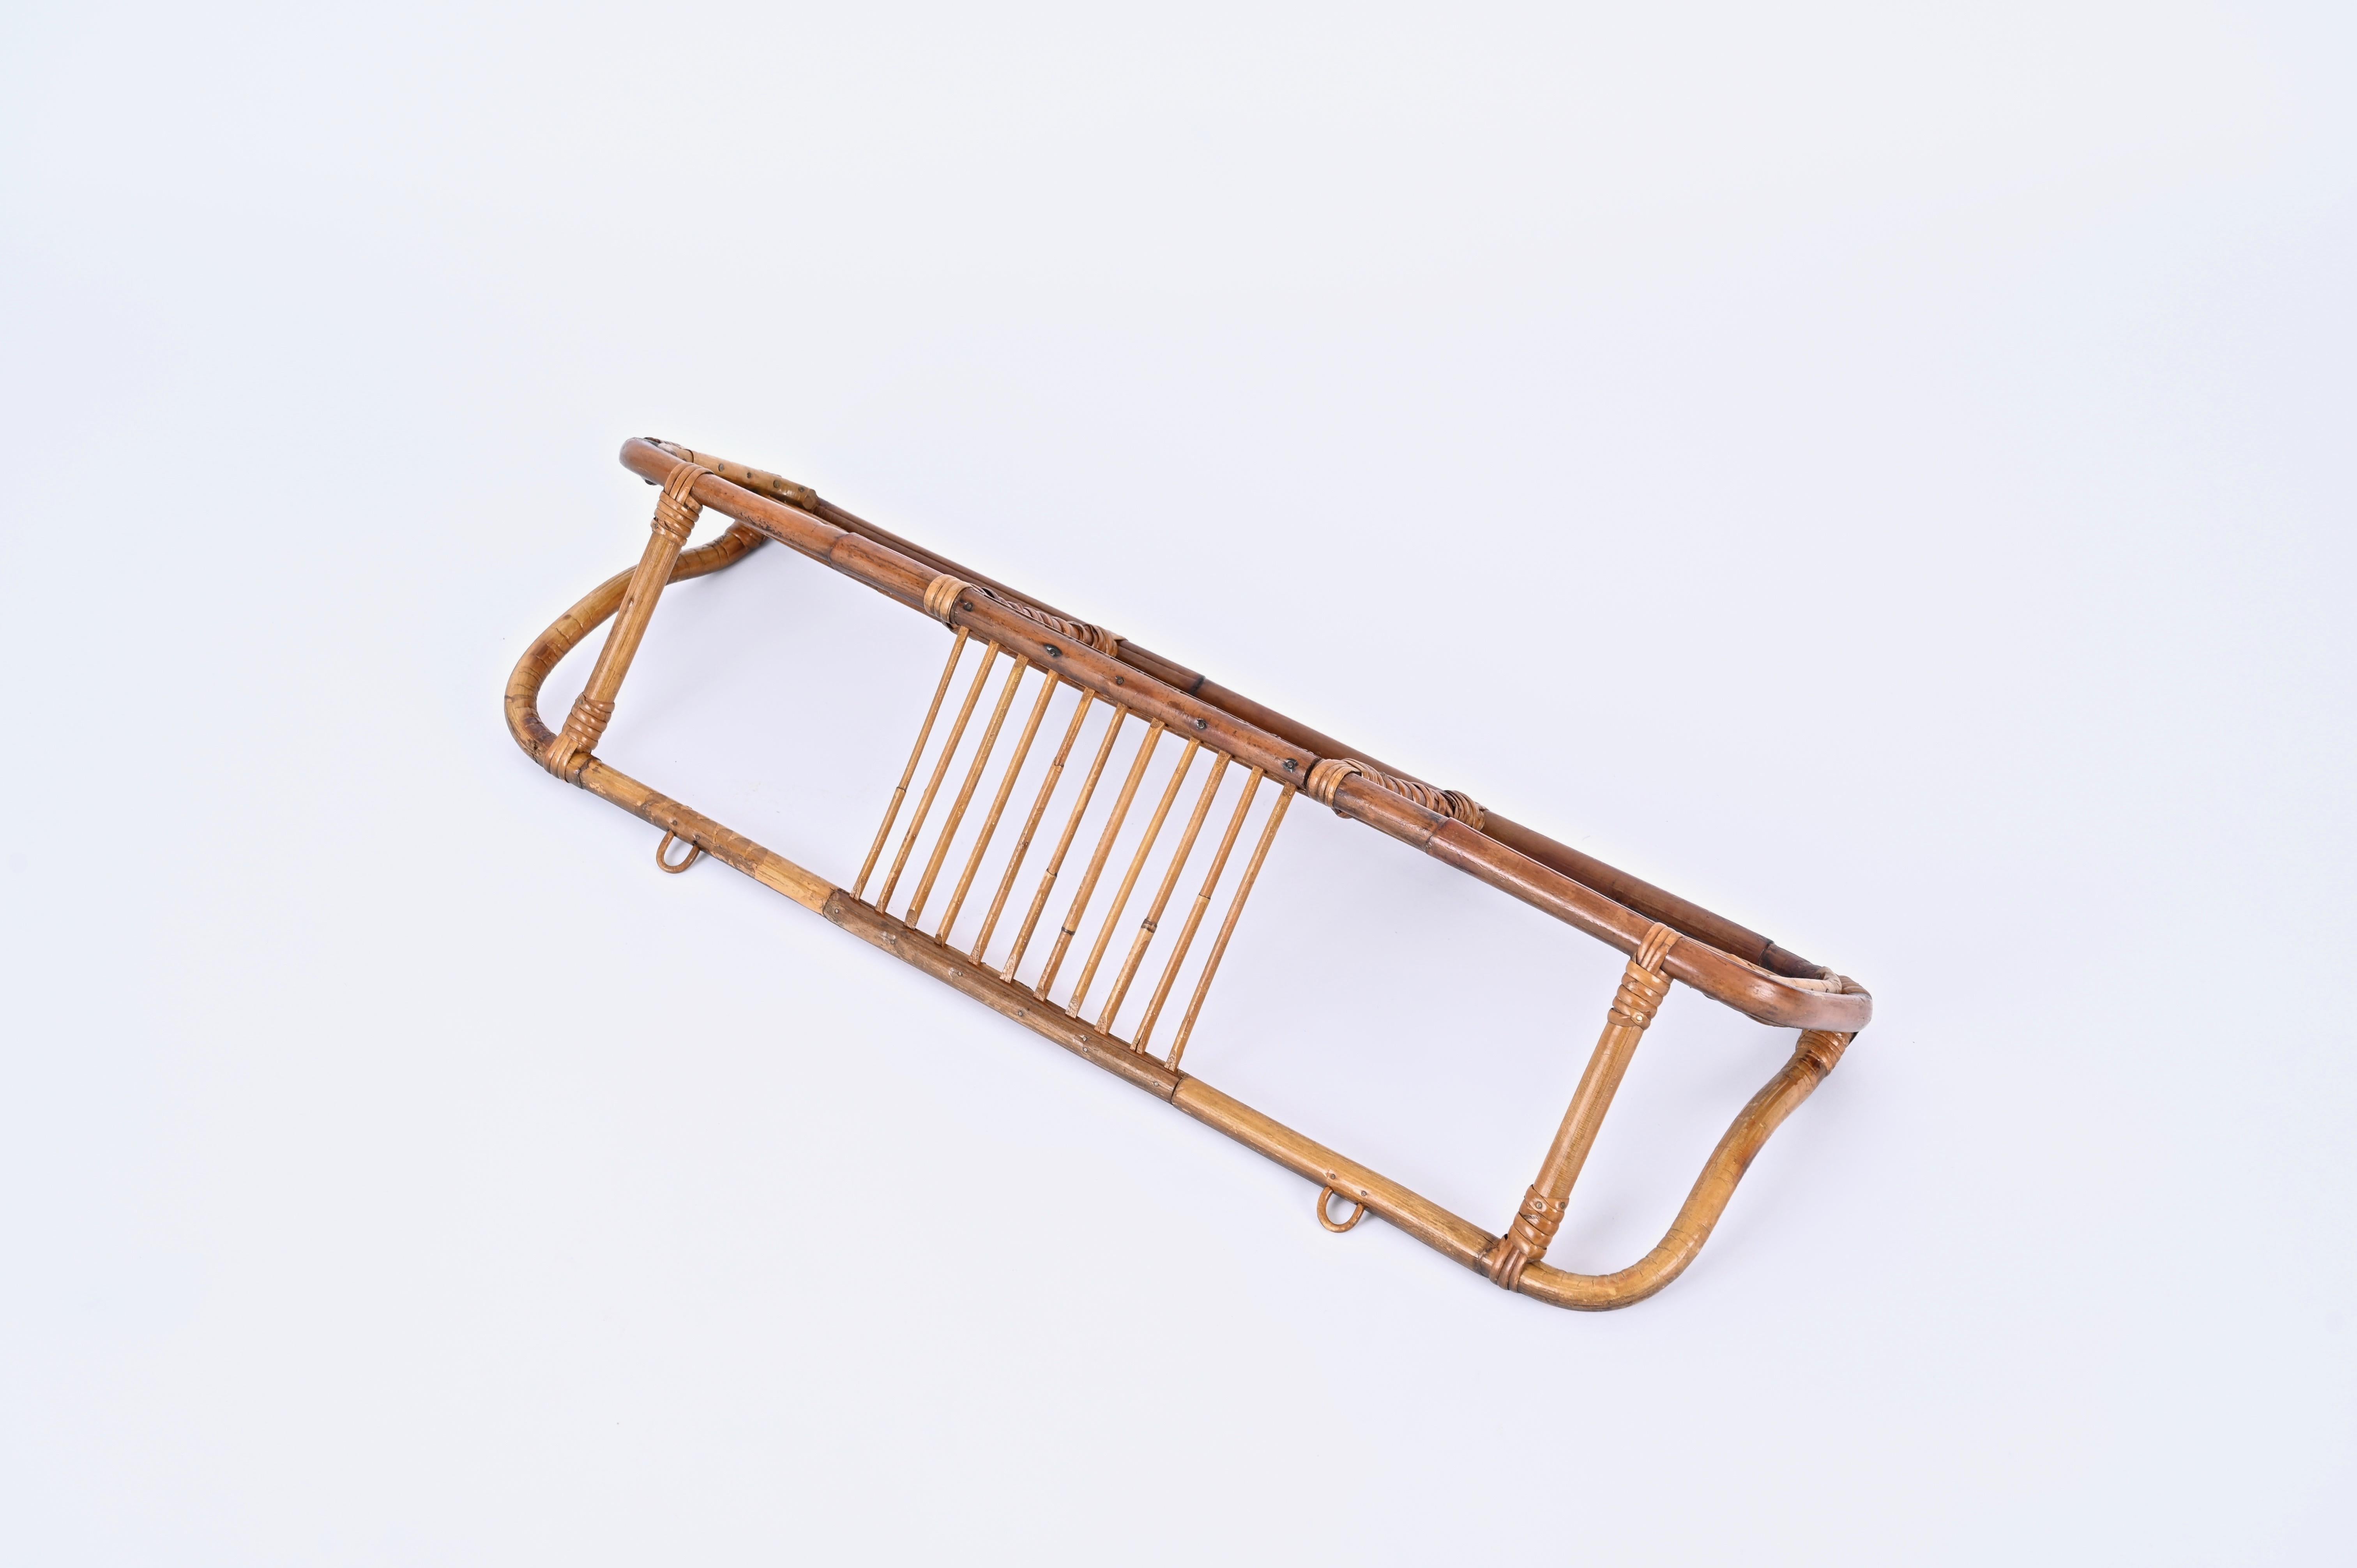  French Riviera Mid-Century Wall Shelf in Rattan and Bamboo, Italy, 1960s For Sale 9